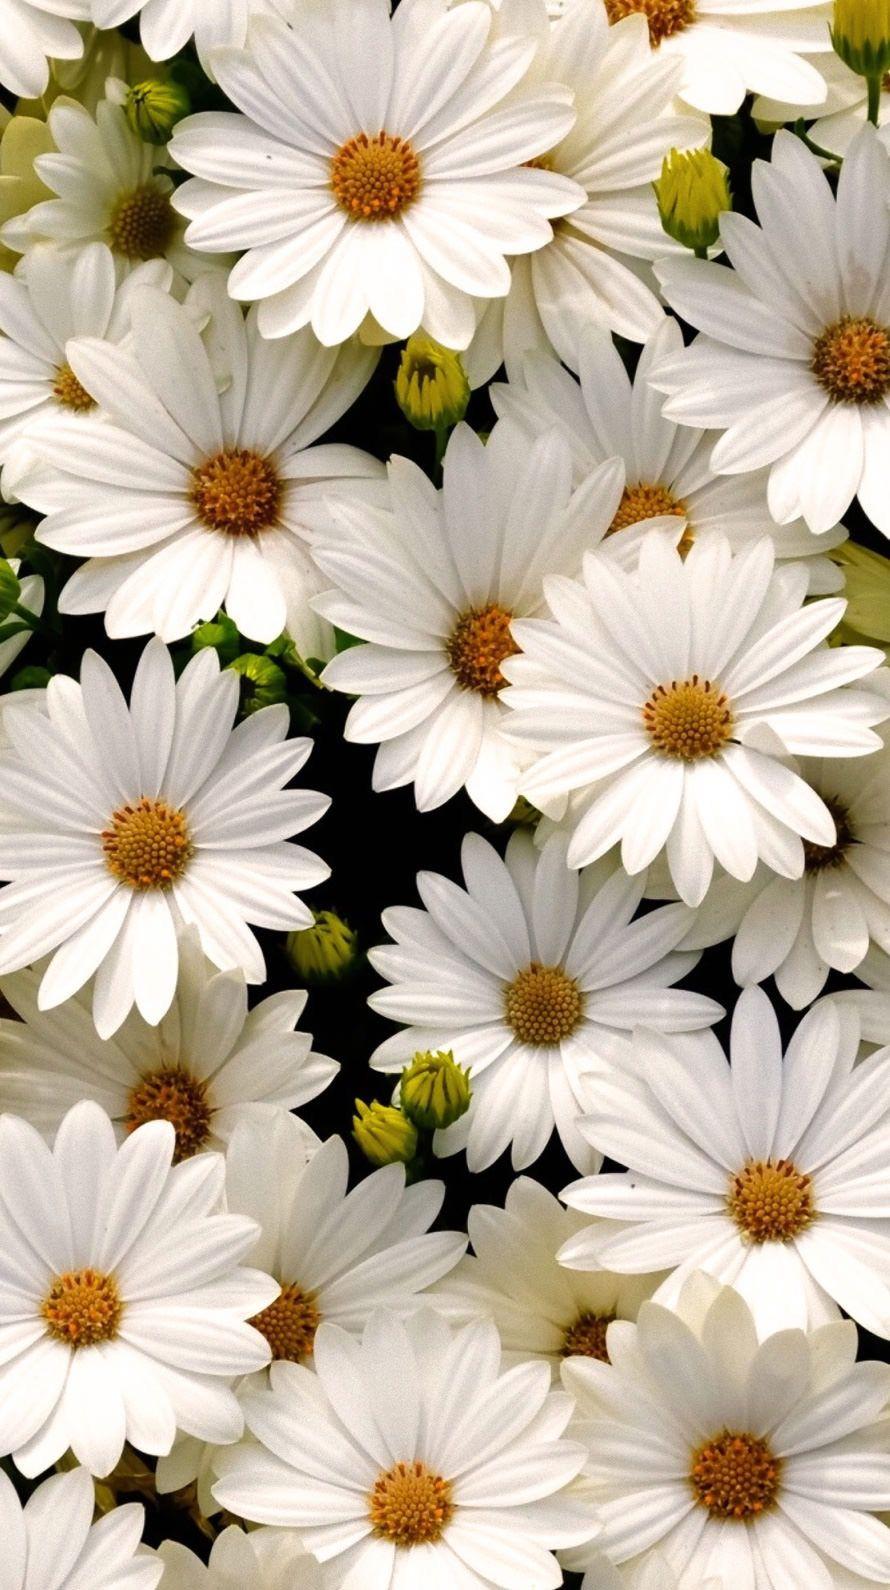 daisies, daisies, perched upon your forehead. aesthetic. Flowers